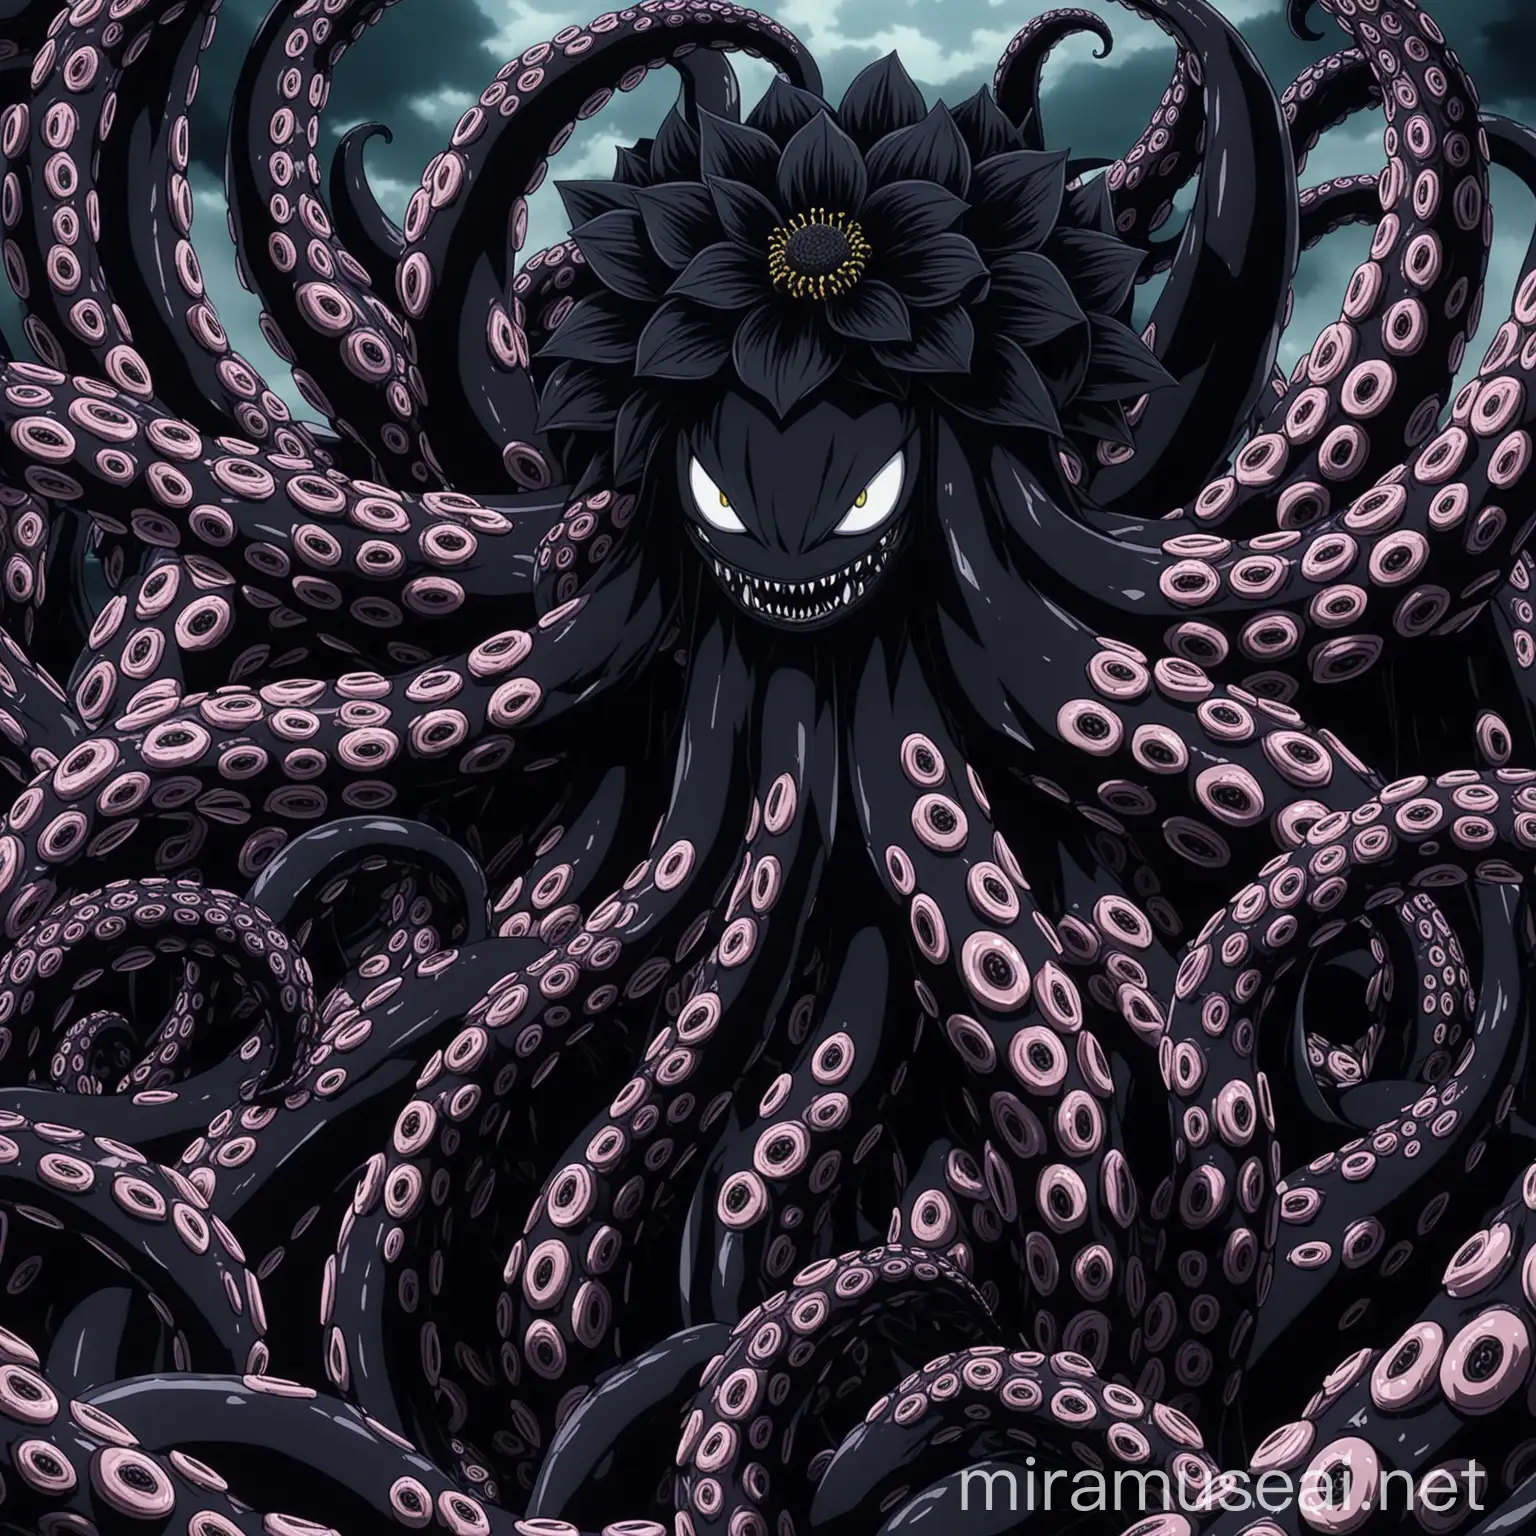 AnimeInspired Black Flower with Tentacles